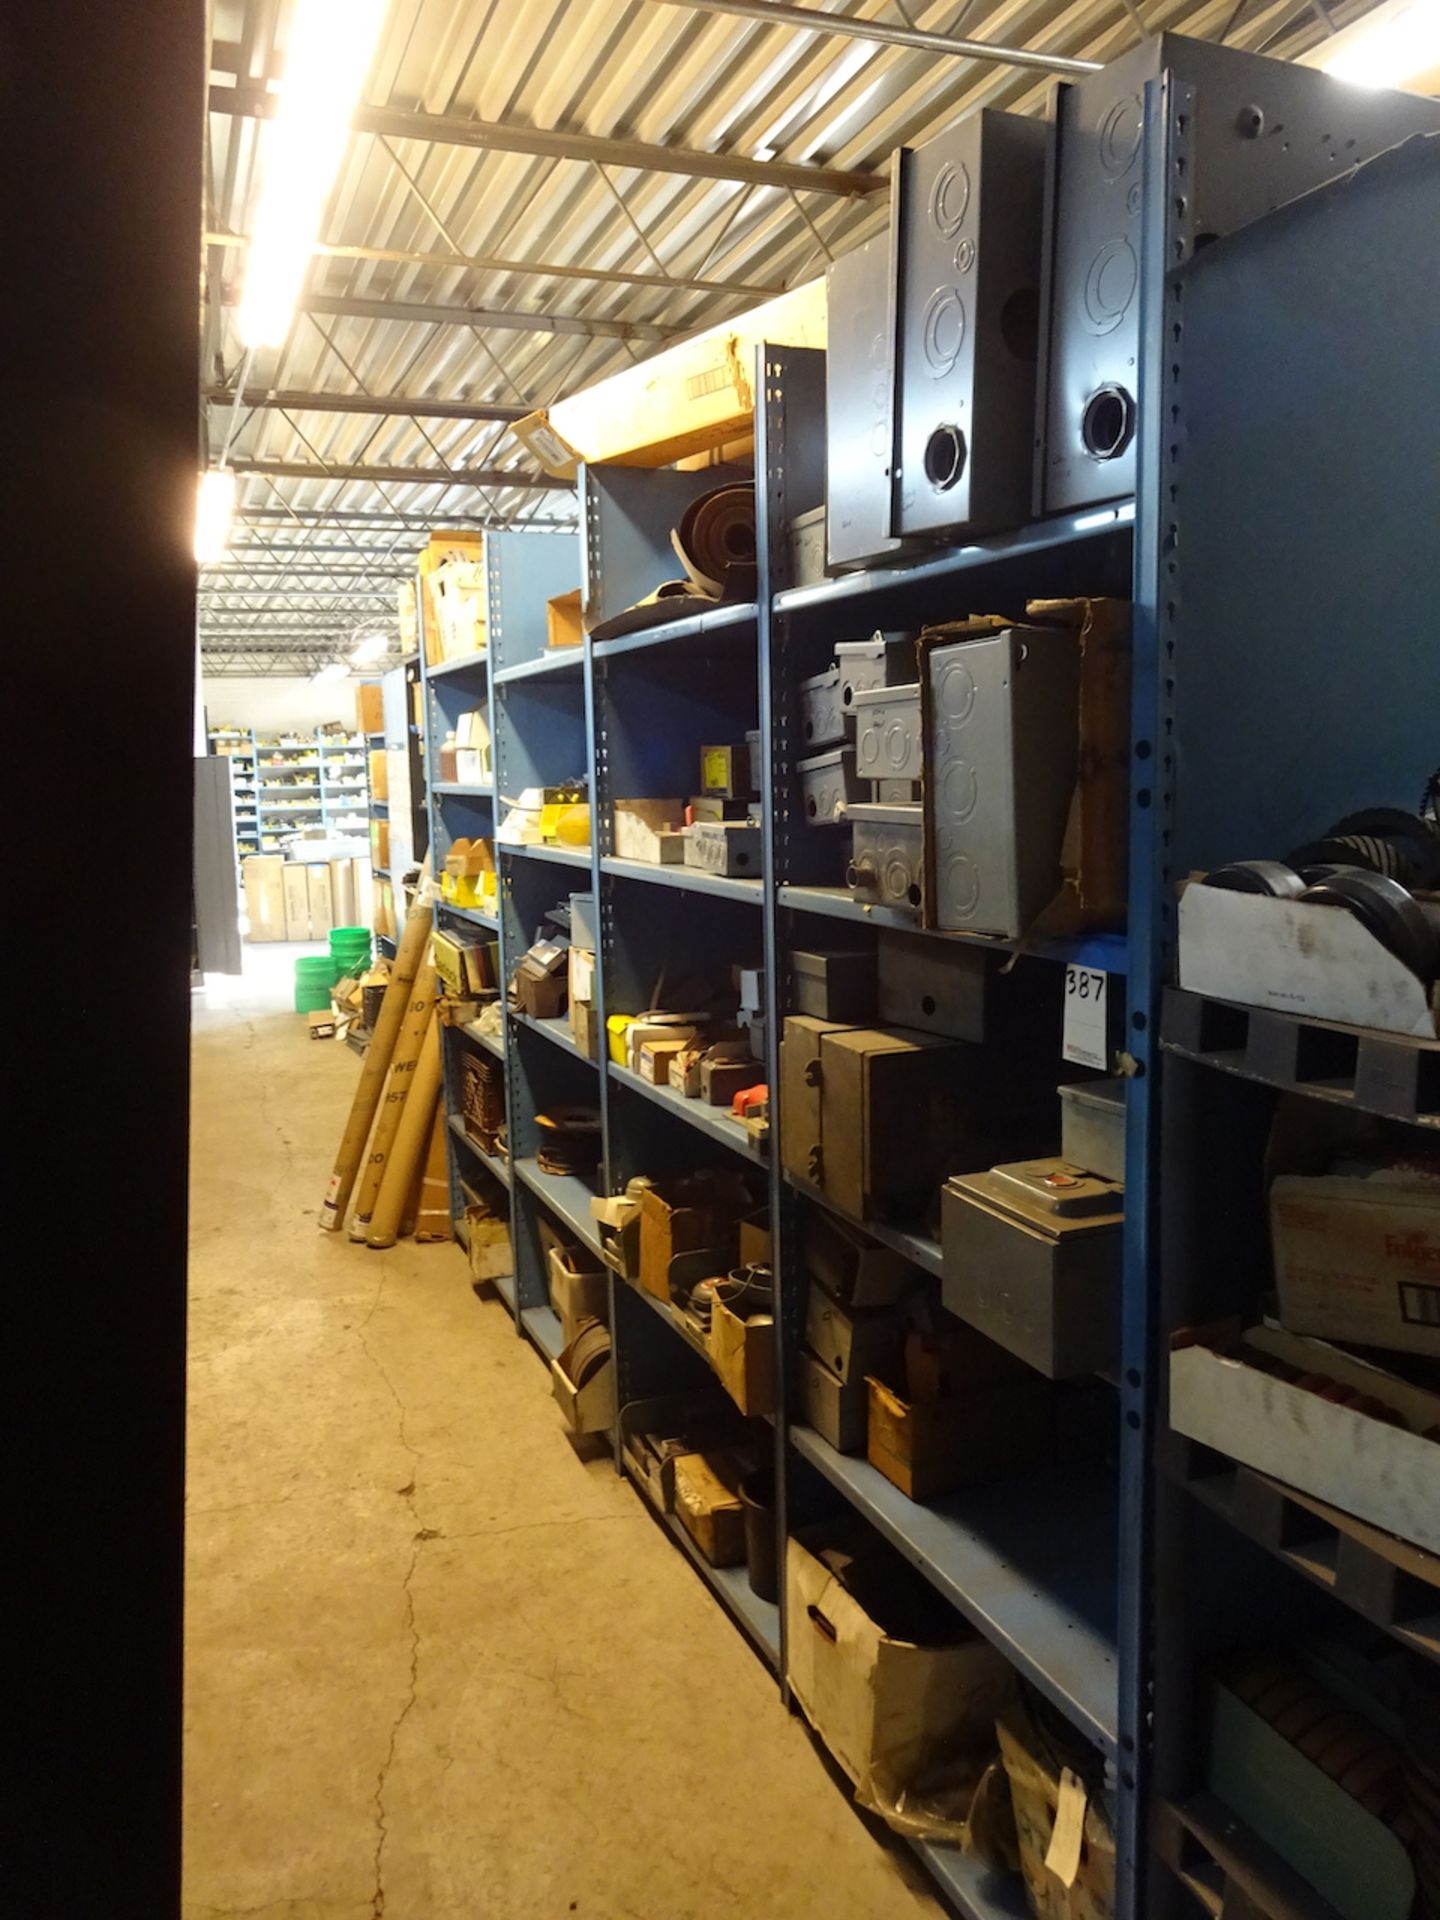 LOT: Assorted Parts & Electrical Boxes in Area (includes shelving)